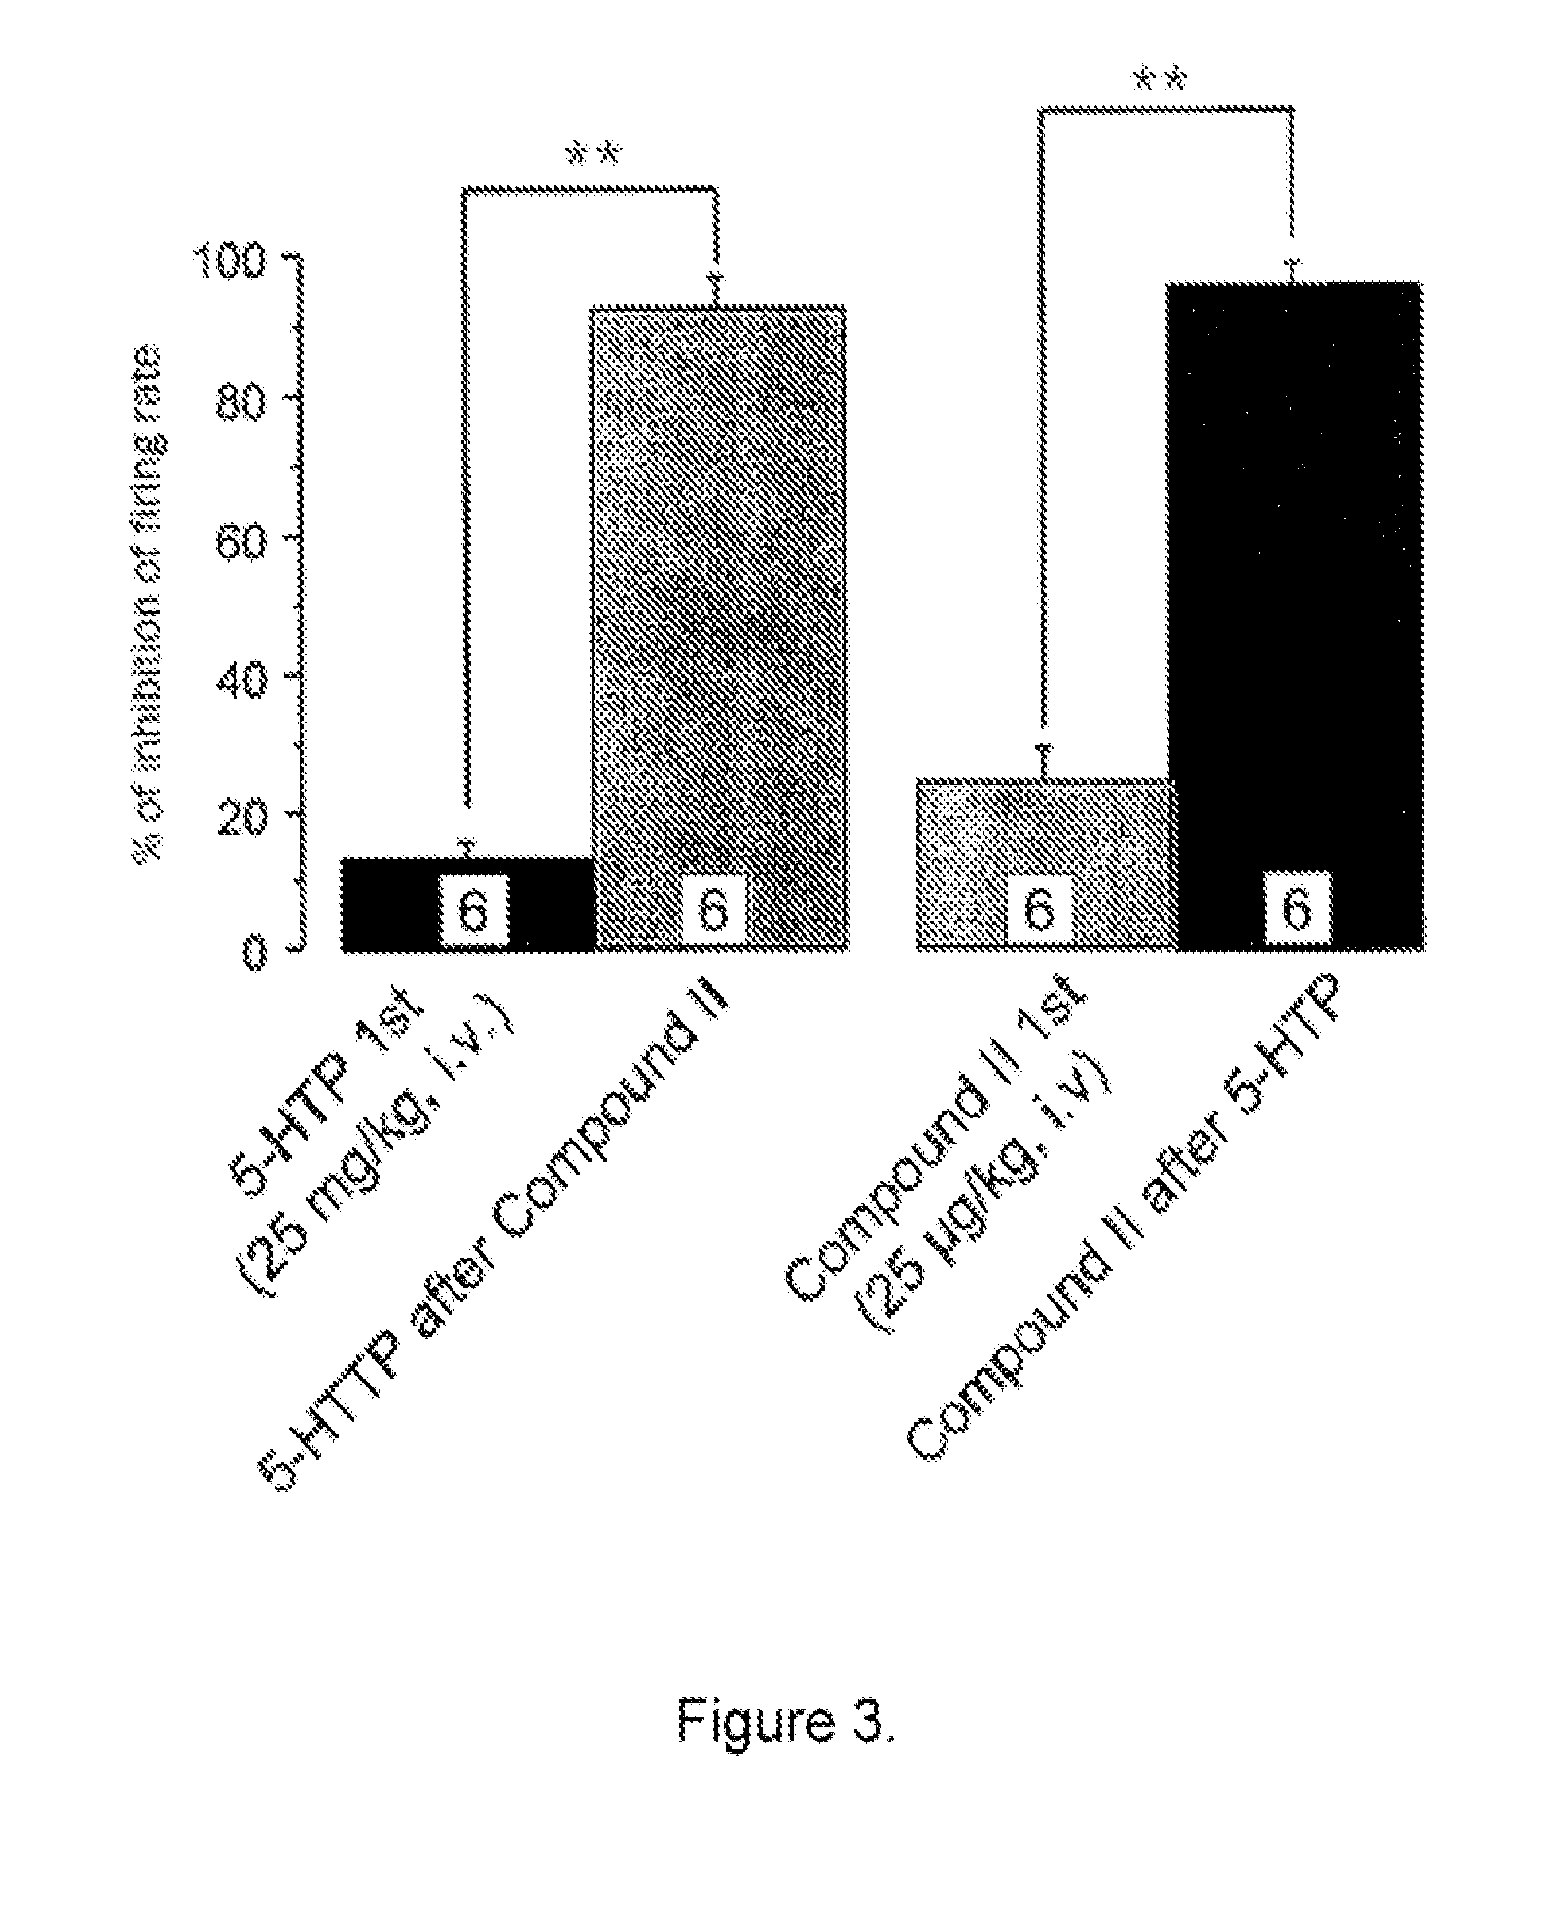 Combination therapy related to serotonin dual action compounds